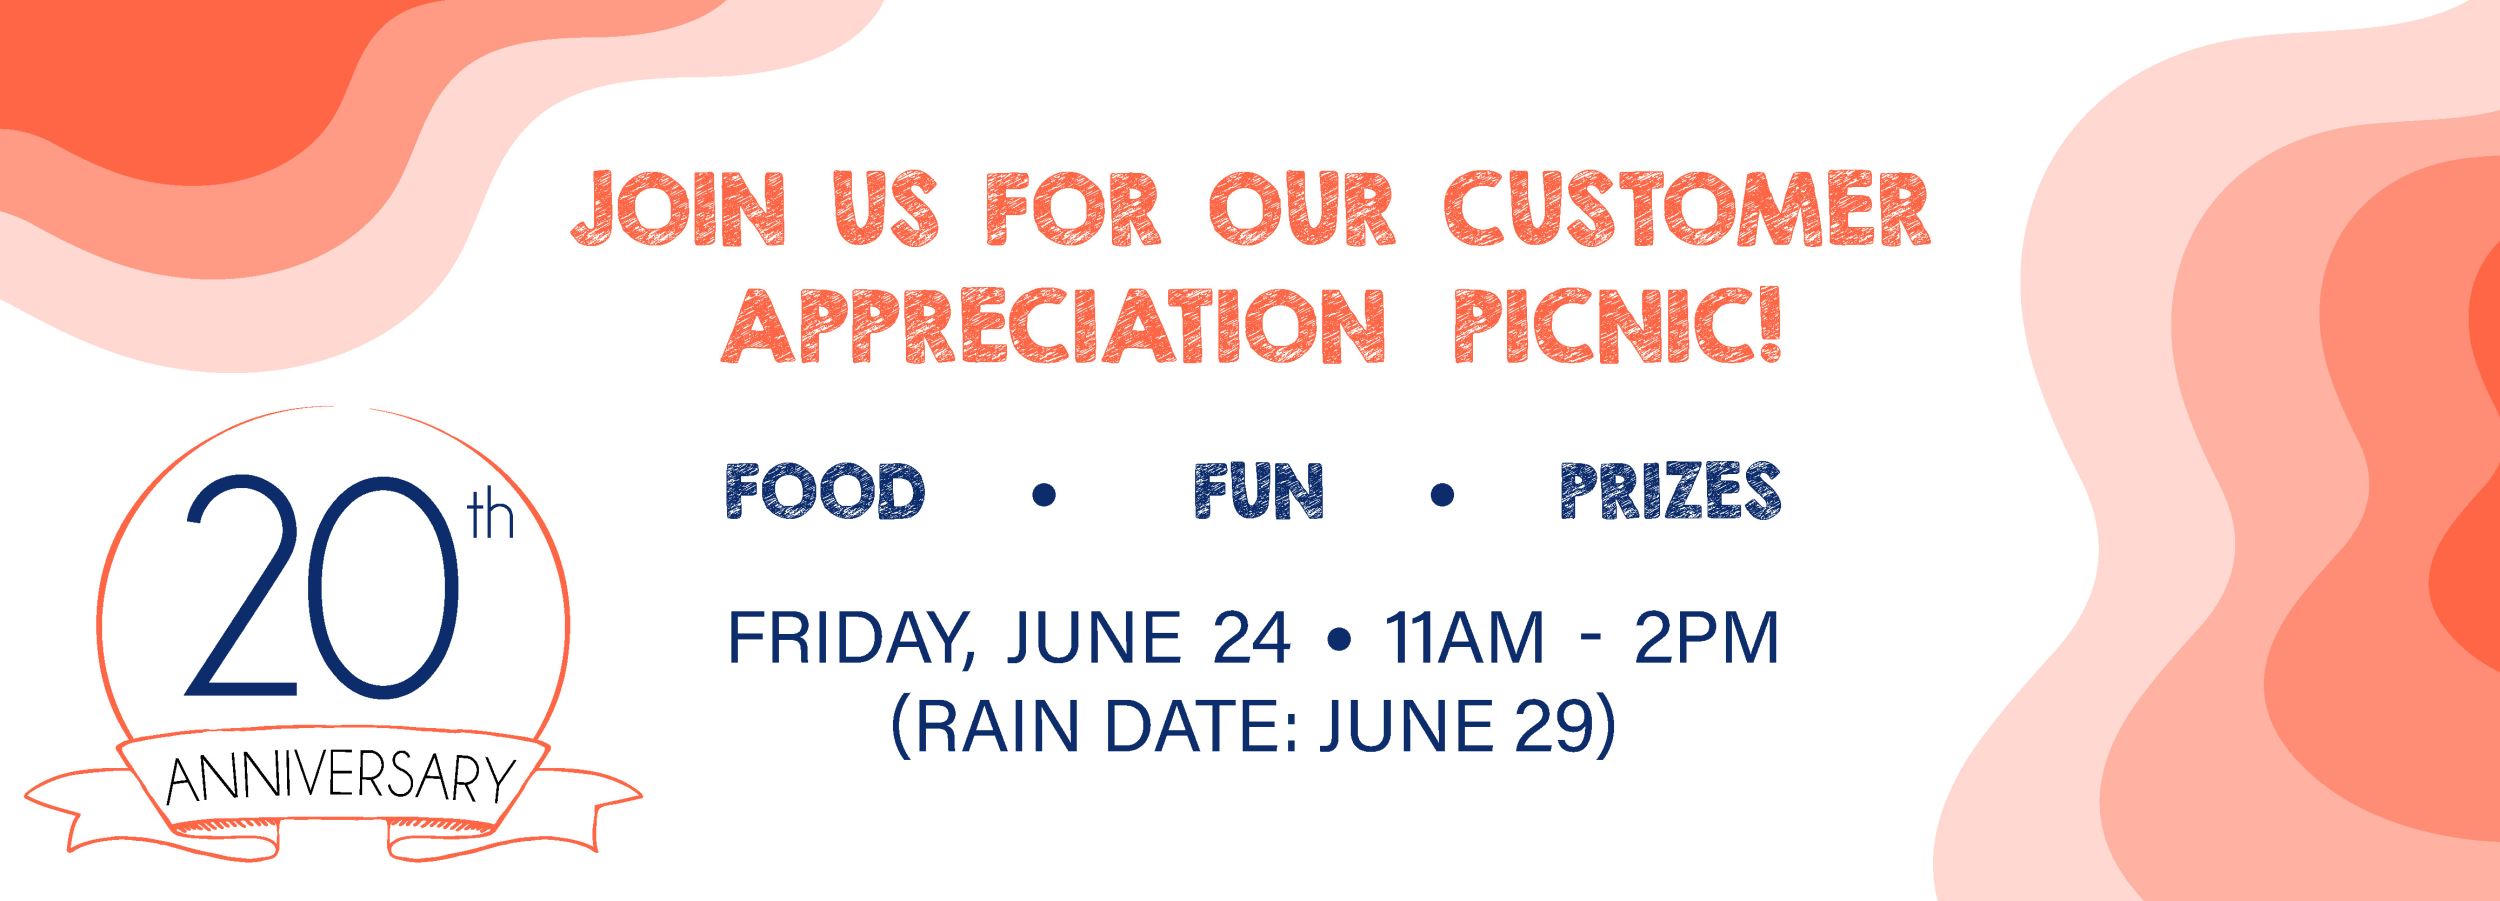 Our Customer Appreciation Picnic 2022 is on June 24th from 11am to 2pm